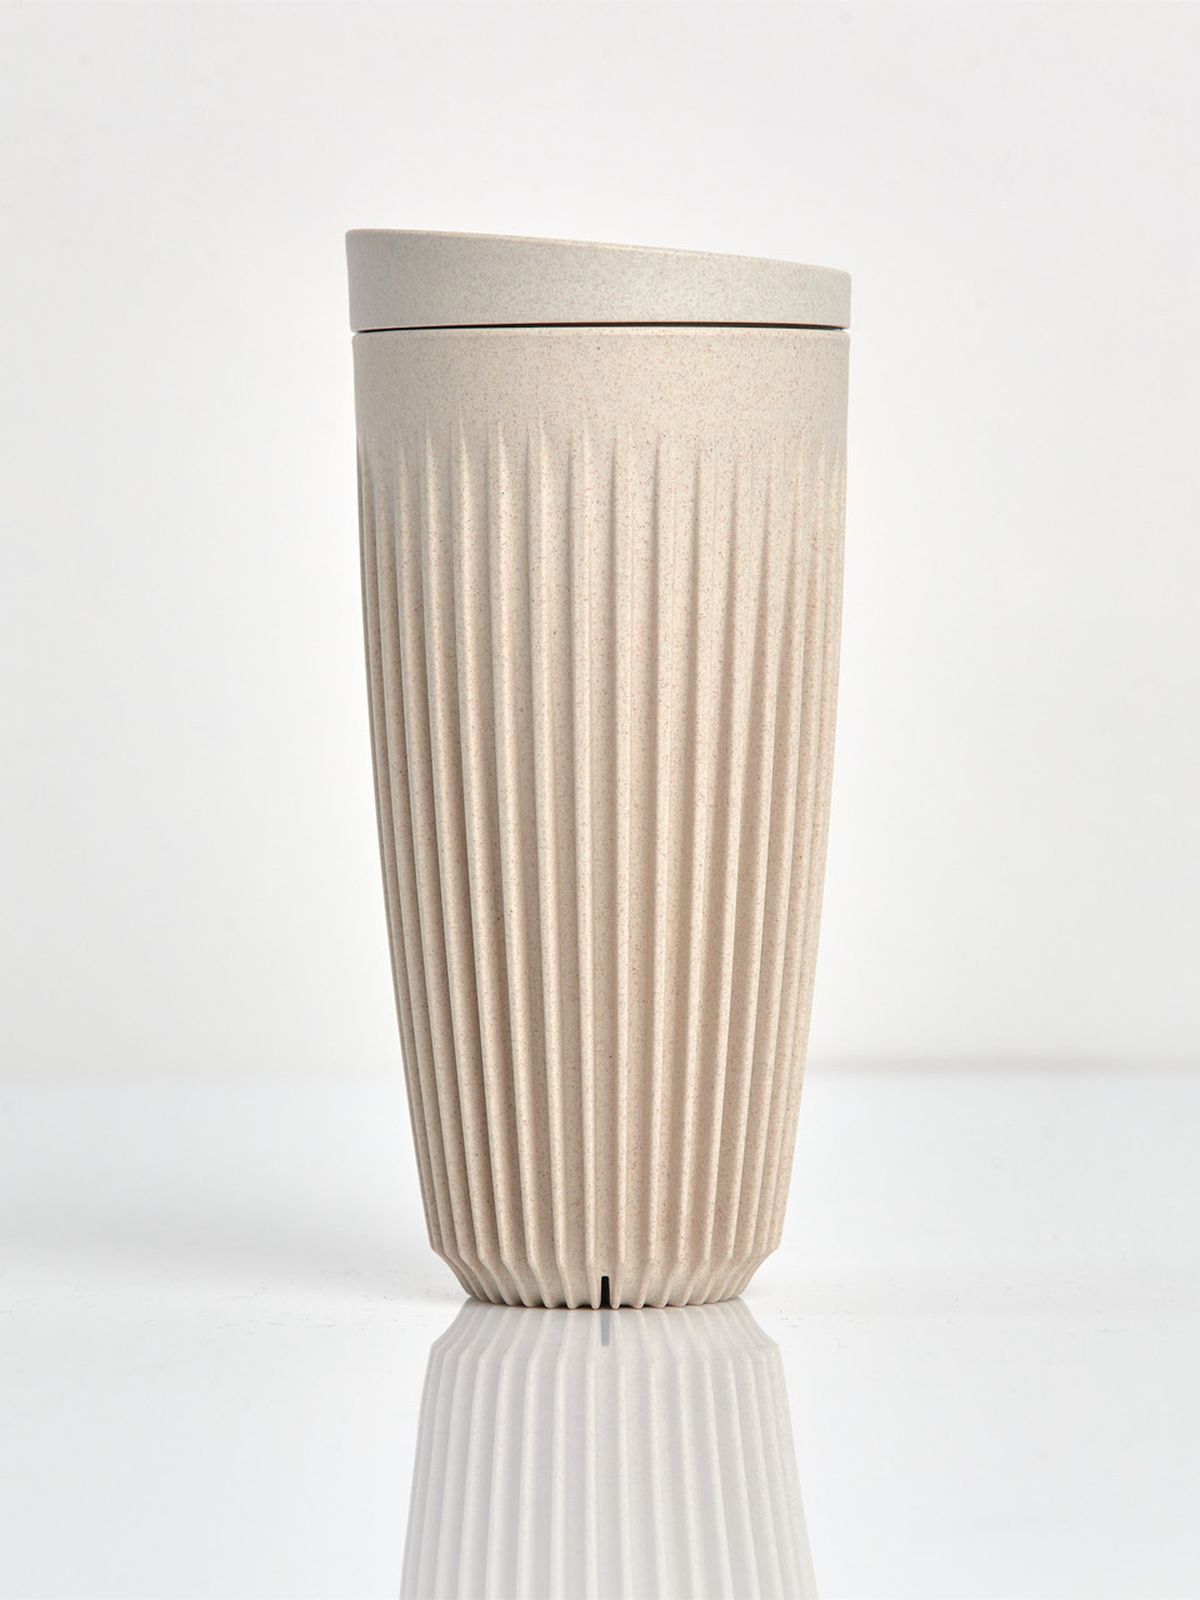 A beige cup with a ridged design